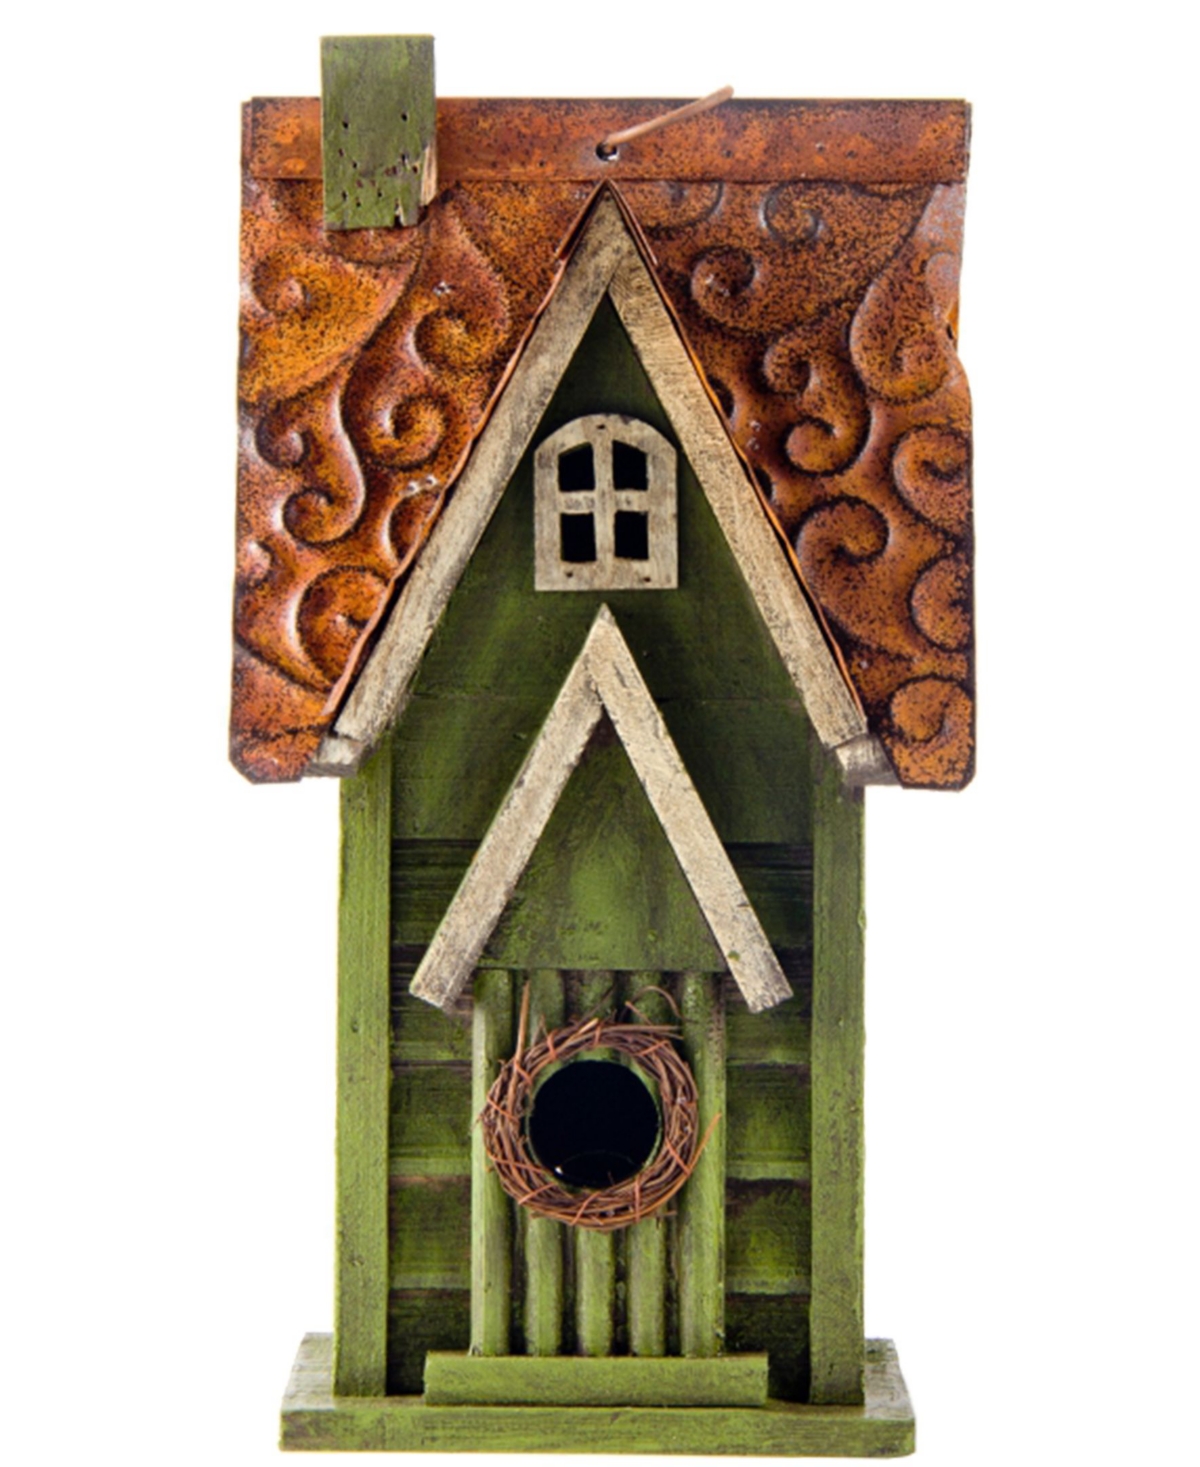 Distressed Solid Wood Birdhouse - Green